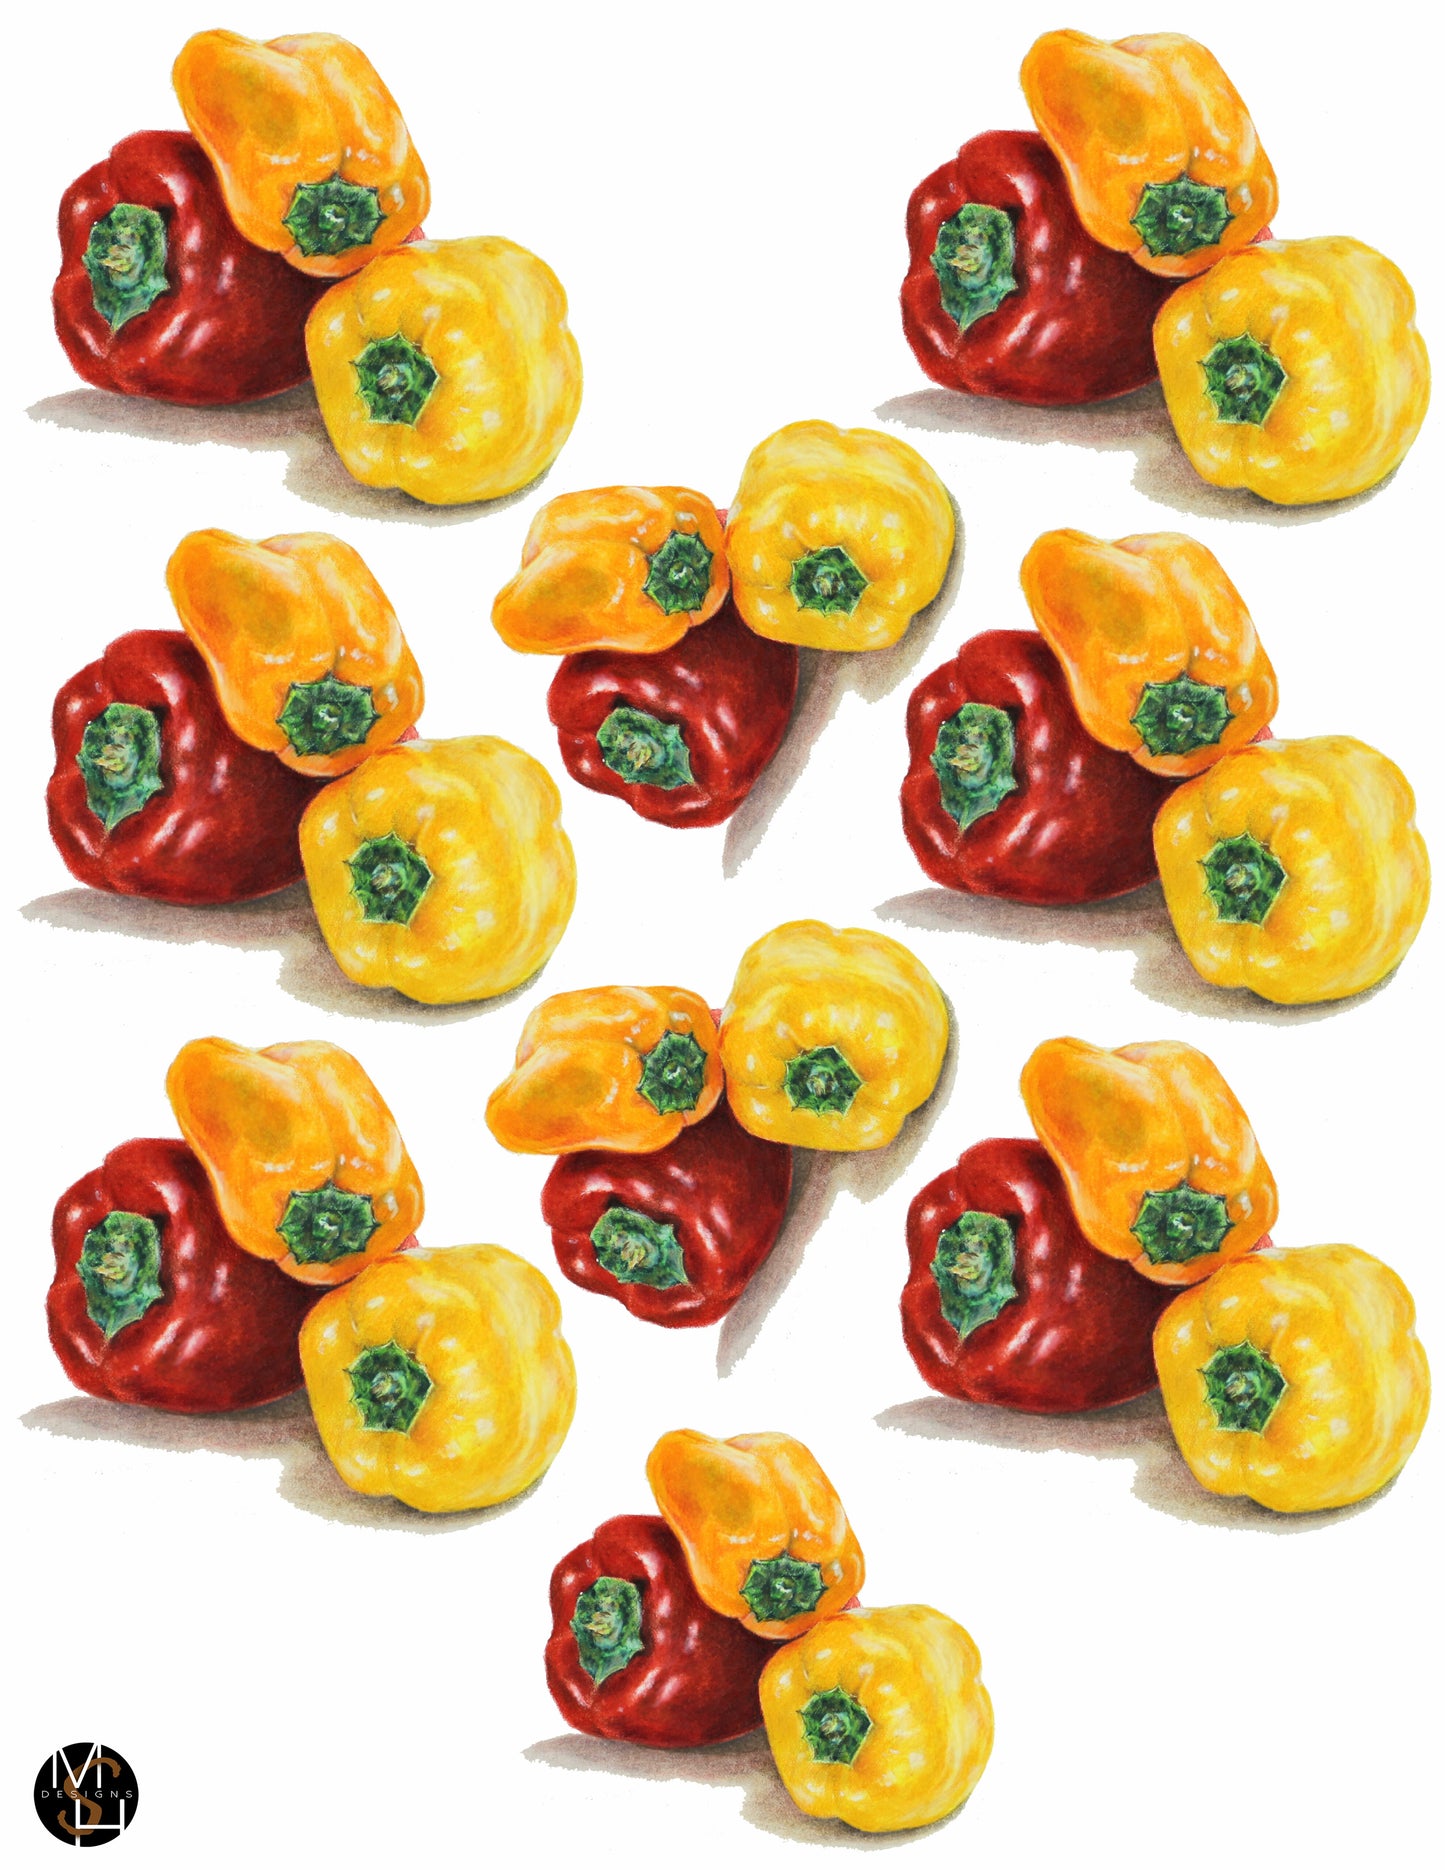 Peppers, designed by Mark Hufford